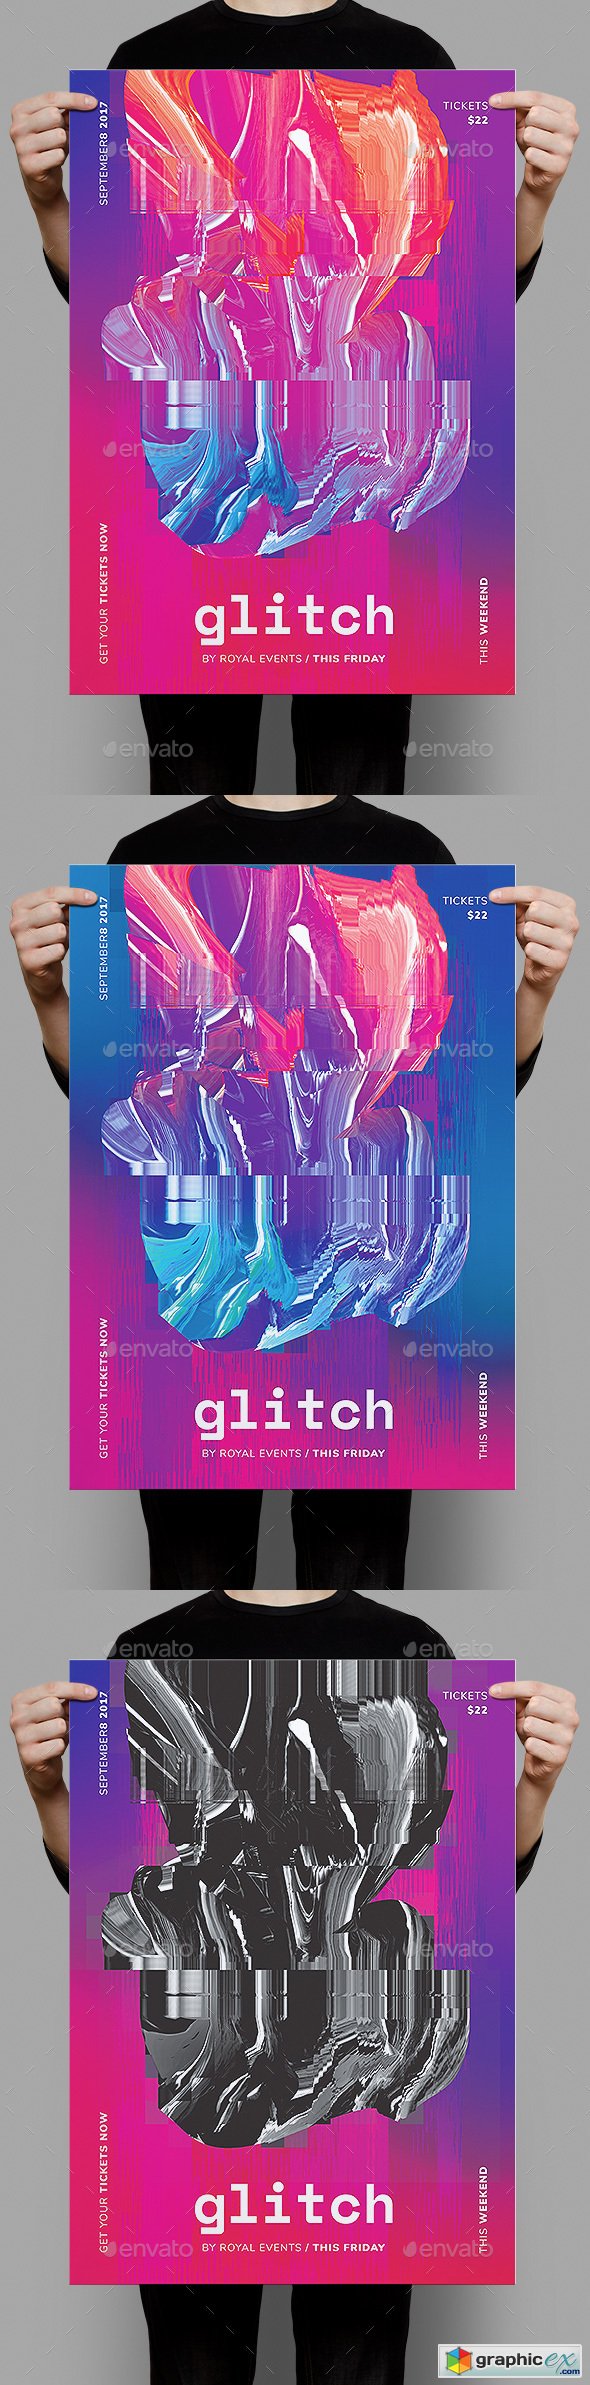 Glitch Poster / Flyer Template